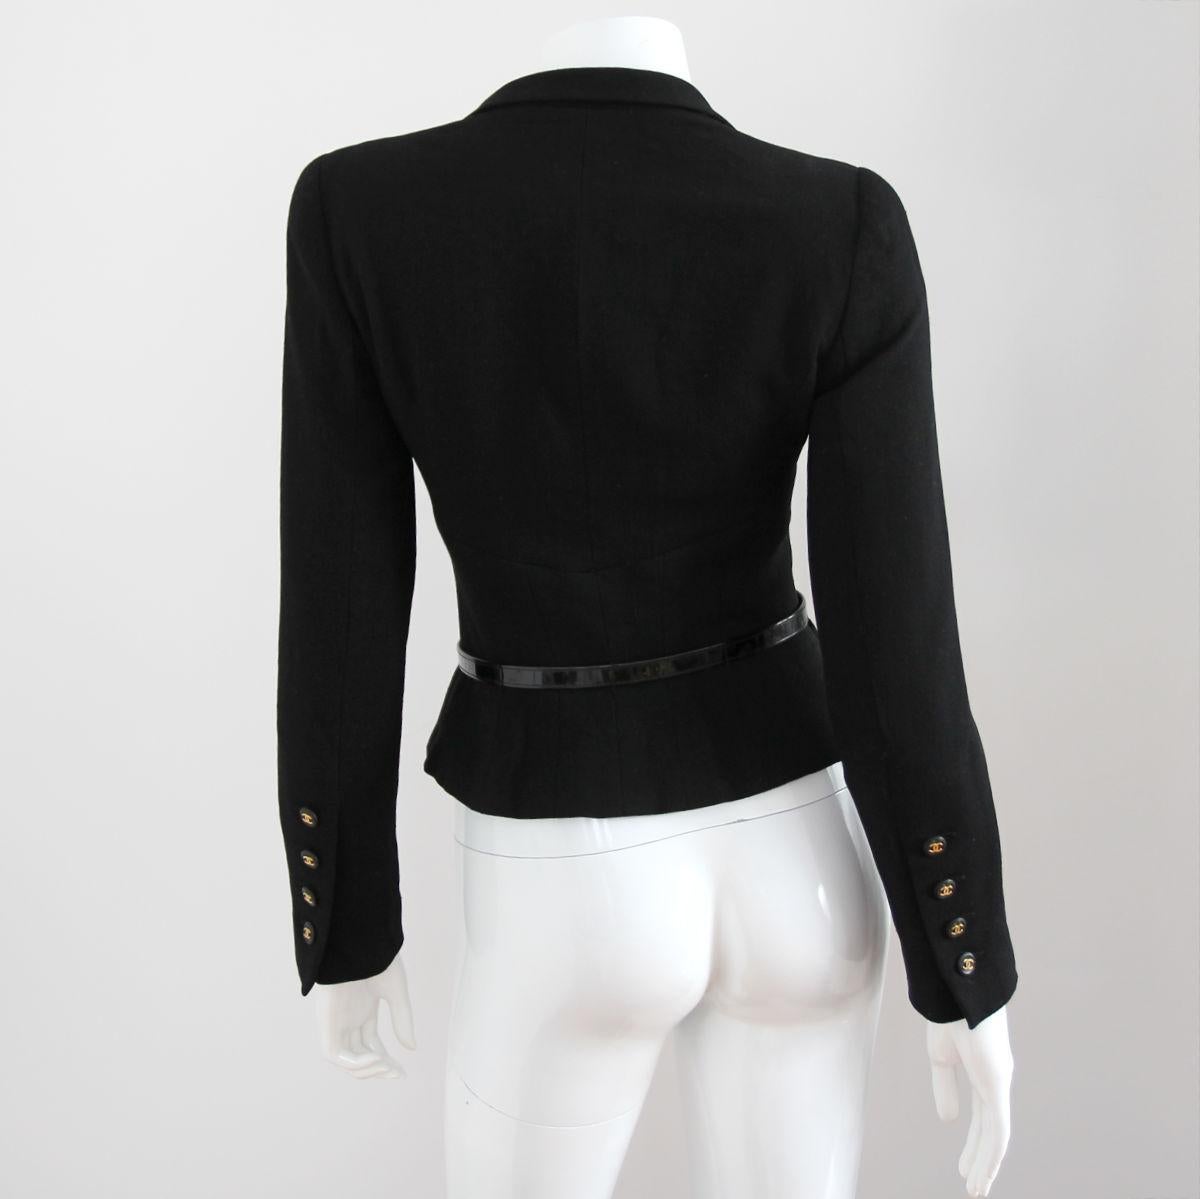 Women's CHANEL 1995 Black Jacket with Patent Leather Belt & CC Buttons by Karl Lagerfeld